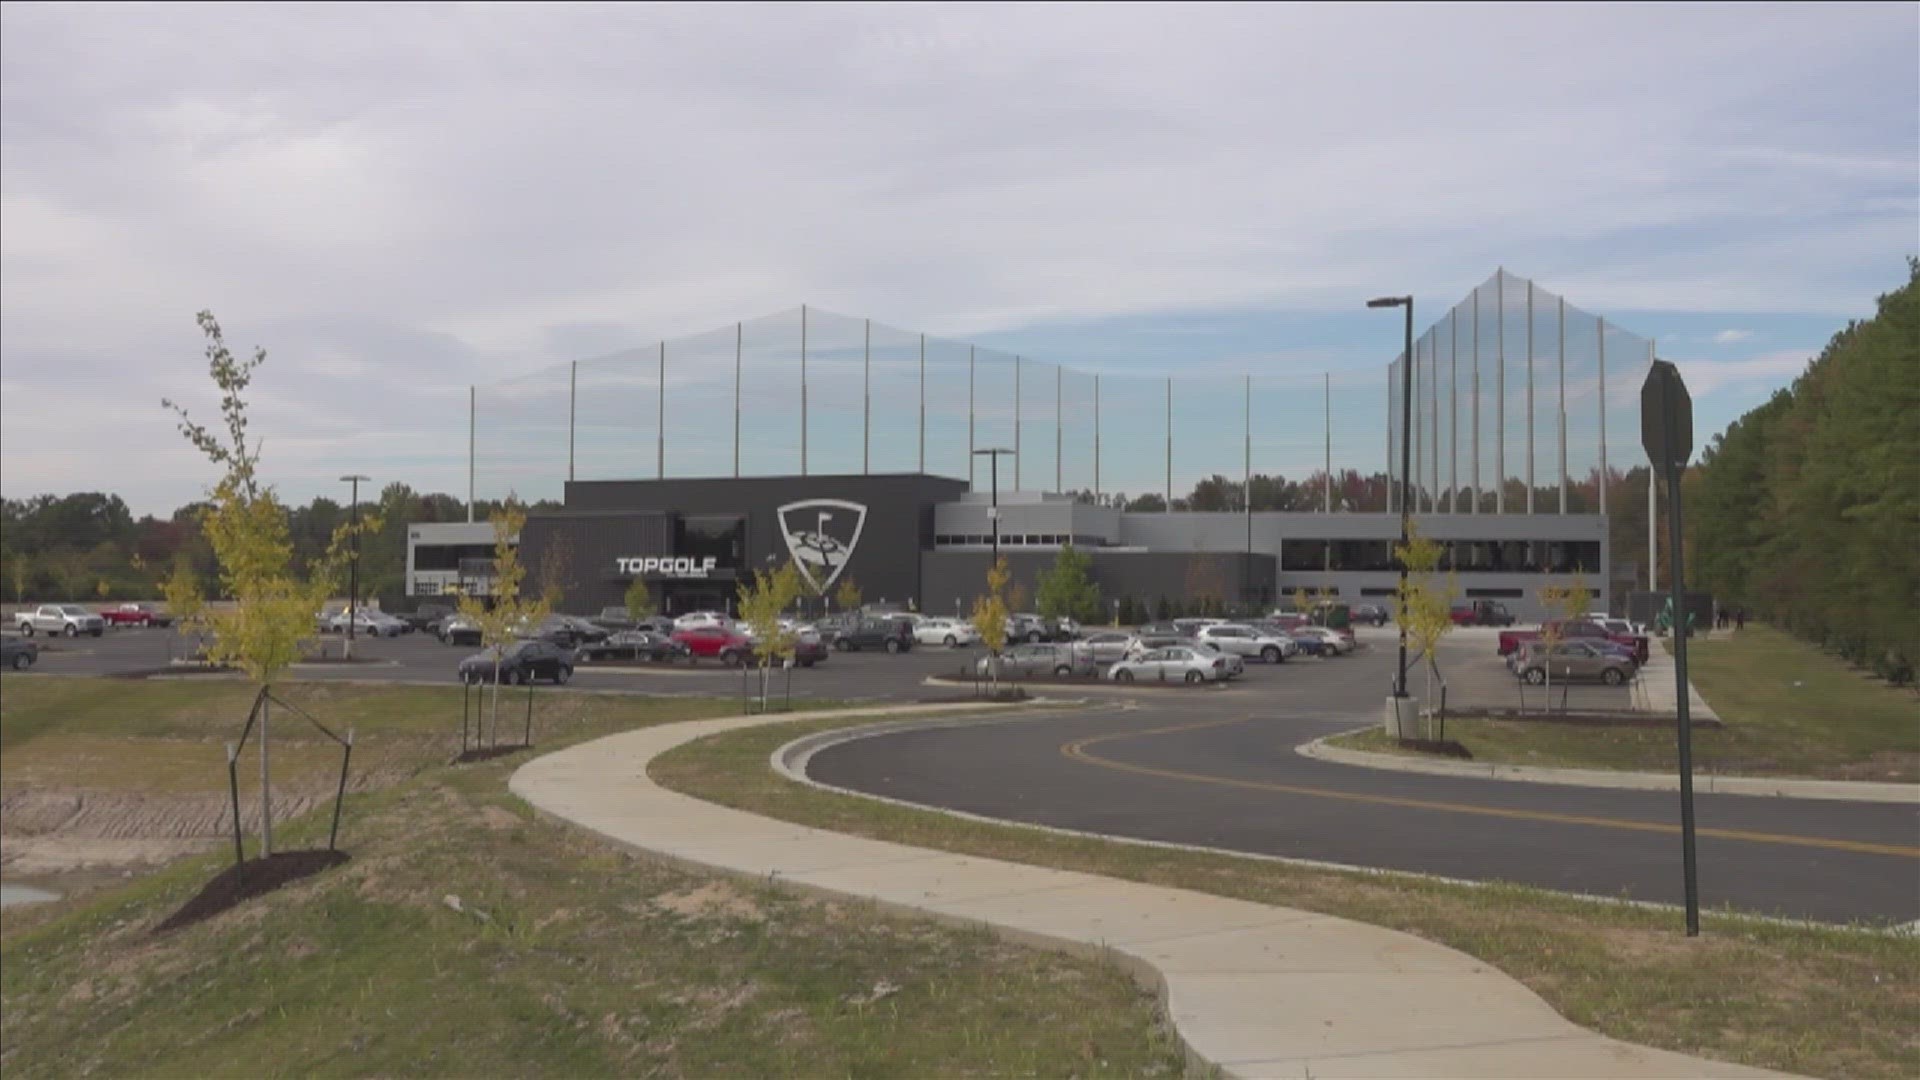 The venue is Topgolf’s fourth in the state. They expect to have about 400 employees.